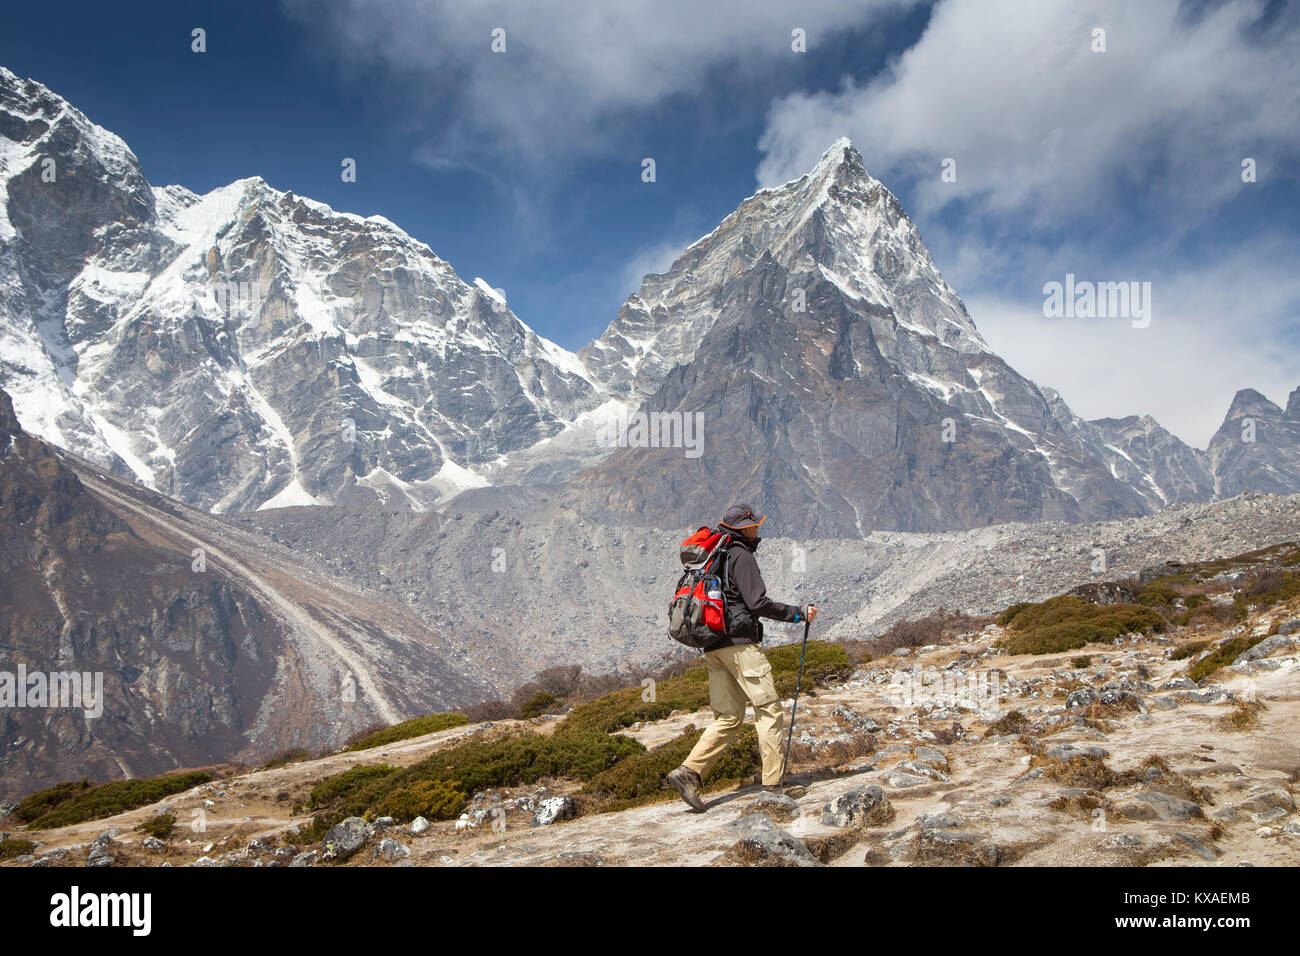 A hiker on his way to Everest Base Camp with the majestic Cholatse mountain in the background.  In the evenings you will be rewarded with delicious Nepalese cuisine around the dining-room fire while sipping Sherpa tea and conversing with other like-minded travelers. Stock Photo